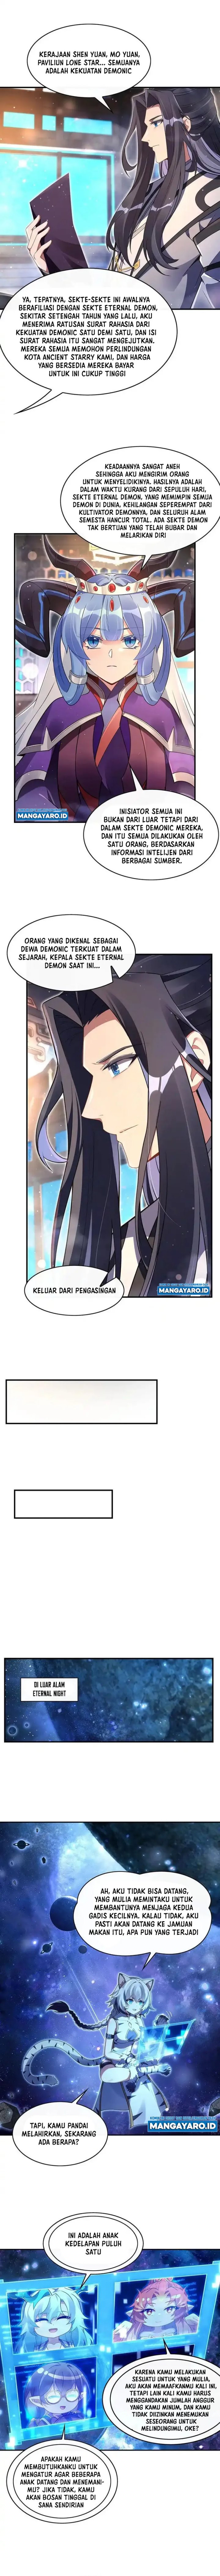 Dilarang COPAS - situs resmi www.mangacanblog.com - Komik my female apprentices are all big shots from the future 277 - chapter 277 278 Indonesia my female apprentices are all big shots from the future 277 - chapter 277 Terbaru 5|Baca Manga Komik Indonesia|Mangacan